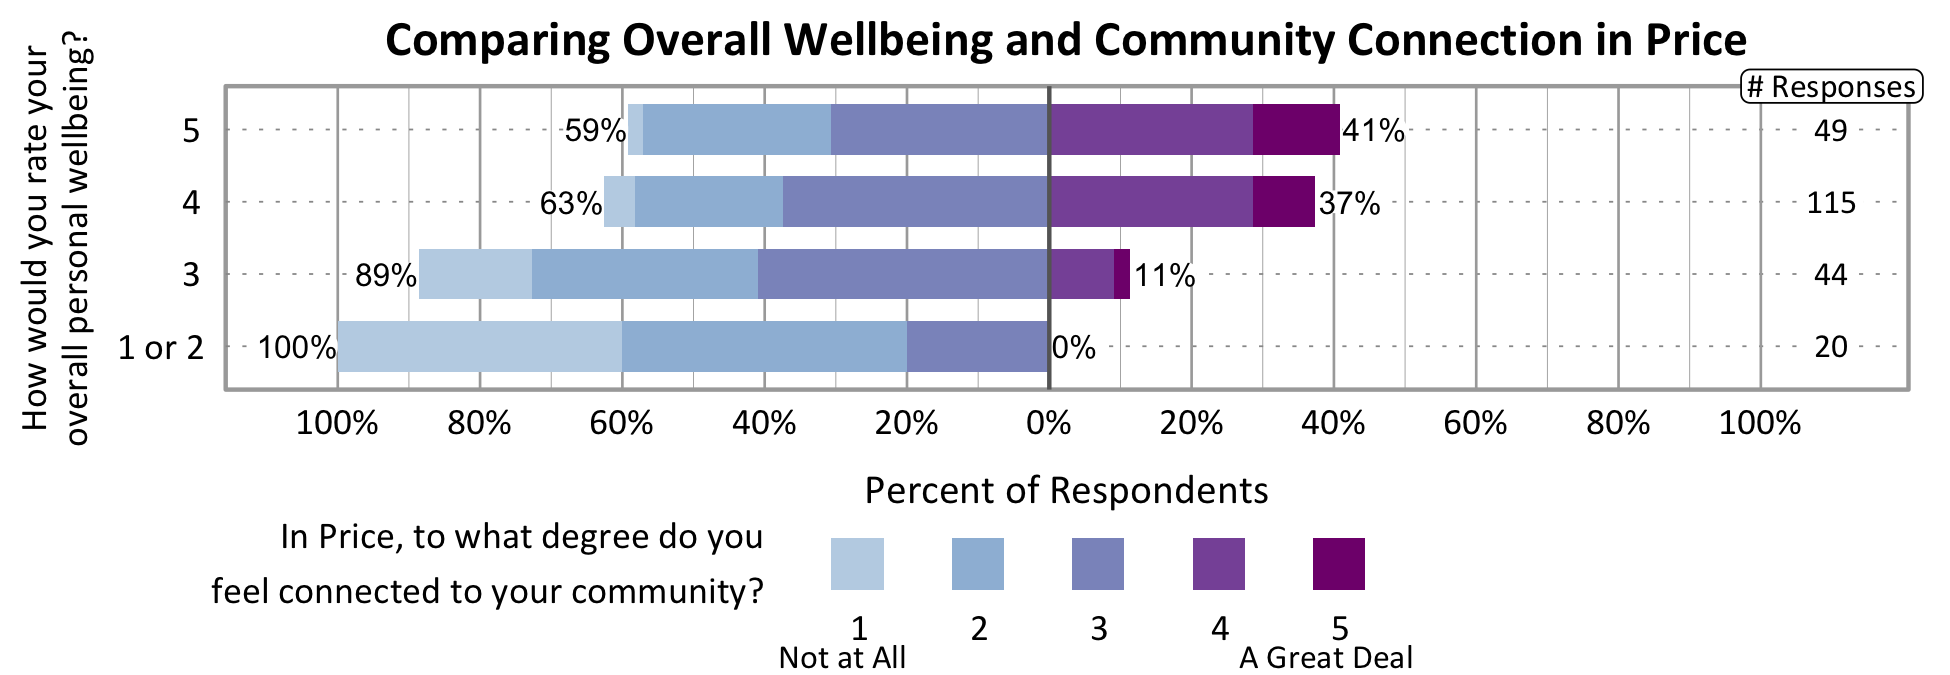 Likert Graph. Title: Comparing Overall Wellbeing and Community Connection in Price. Of the 20 respondents that rate their overall personal wellbeing as a 1 or 2, 100% indicate a community connection score of 1, 2, or 3 while 0% indicate a community connection score of 4 or 5. Of the 44 respondents that rate their overall personal wellbeing as a 3, 89% indicate a community connection score of 1, 2, or 3 while 11% indicate a community connection score of 4 or 5. Of the 115 respondents that rate their overall personal wellbeing as a 4, 63% indicate a community connection score of 1, 2, or 3 while 37% indicate a community connection score of 4 or 5. Of the 49 participants that rate their overall wellbeing as a 5, 59% indicate a community connection score of 1, 2, or 3 while 41% indicate a community connection score of 4 or 5.